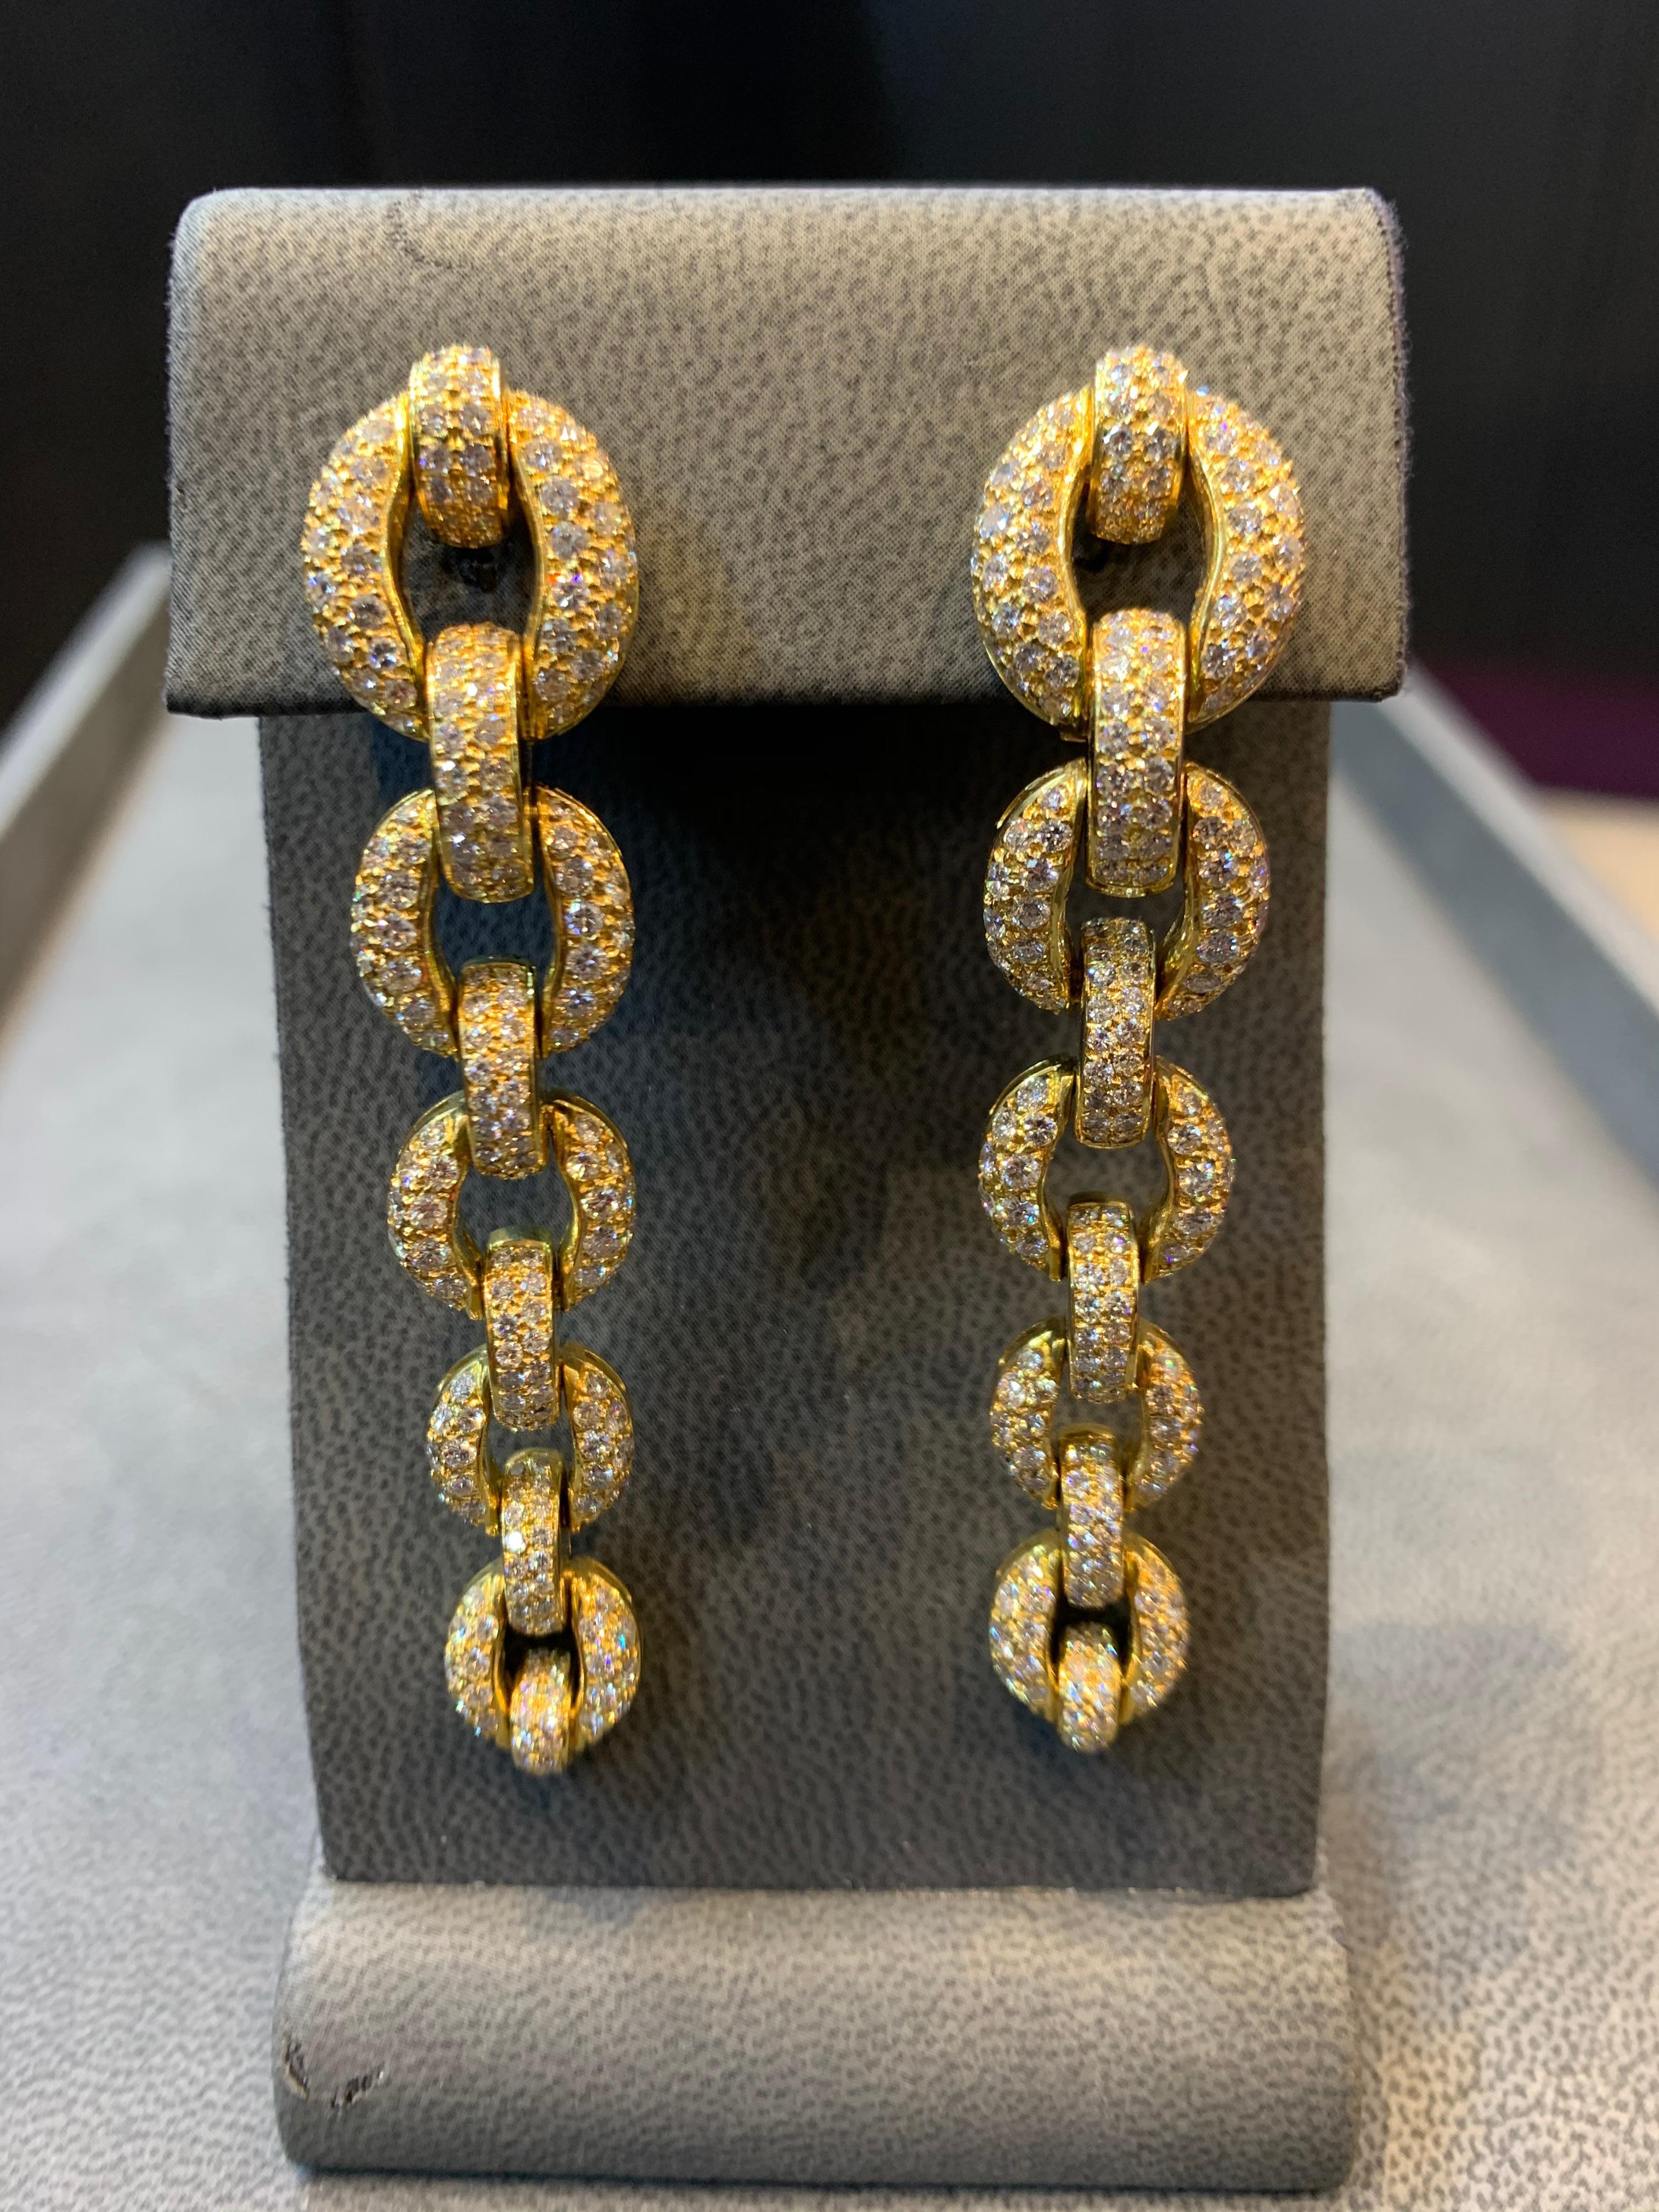 Diamond And Gold Drop Earrings
Back Type: Clip On
18K Yellow Gold
12.81 Carats 